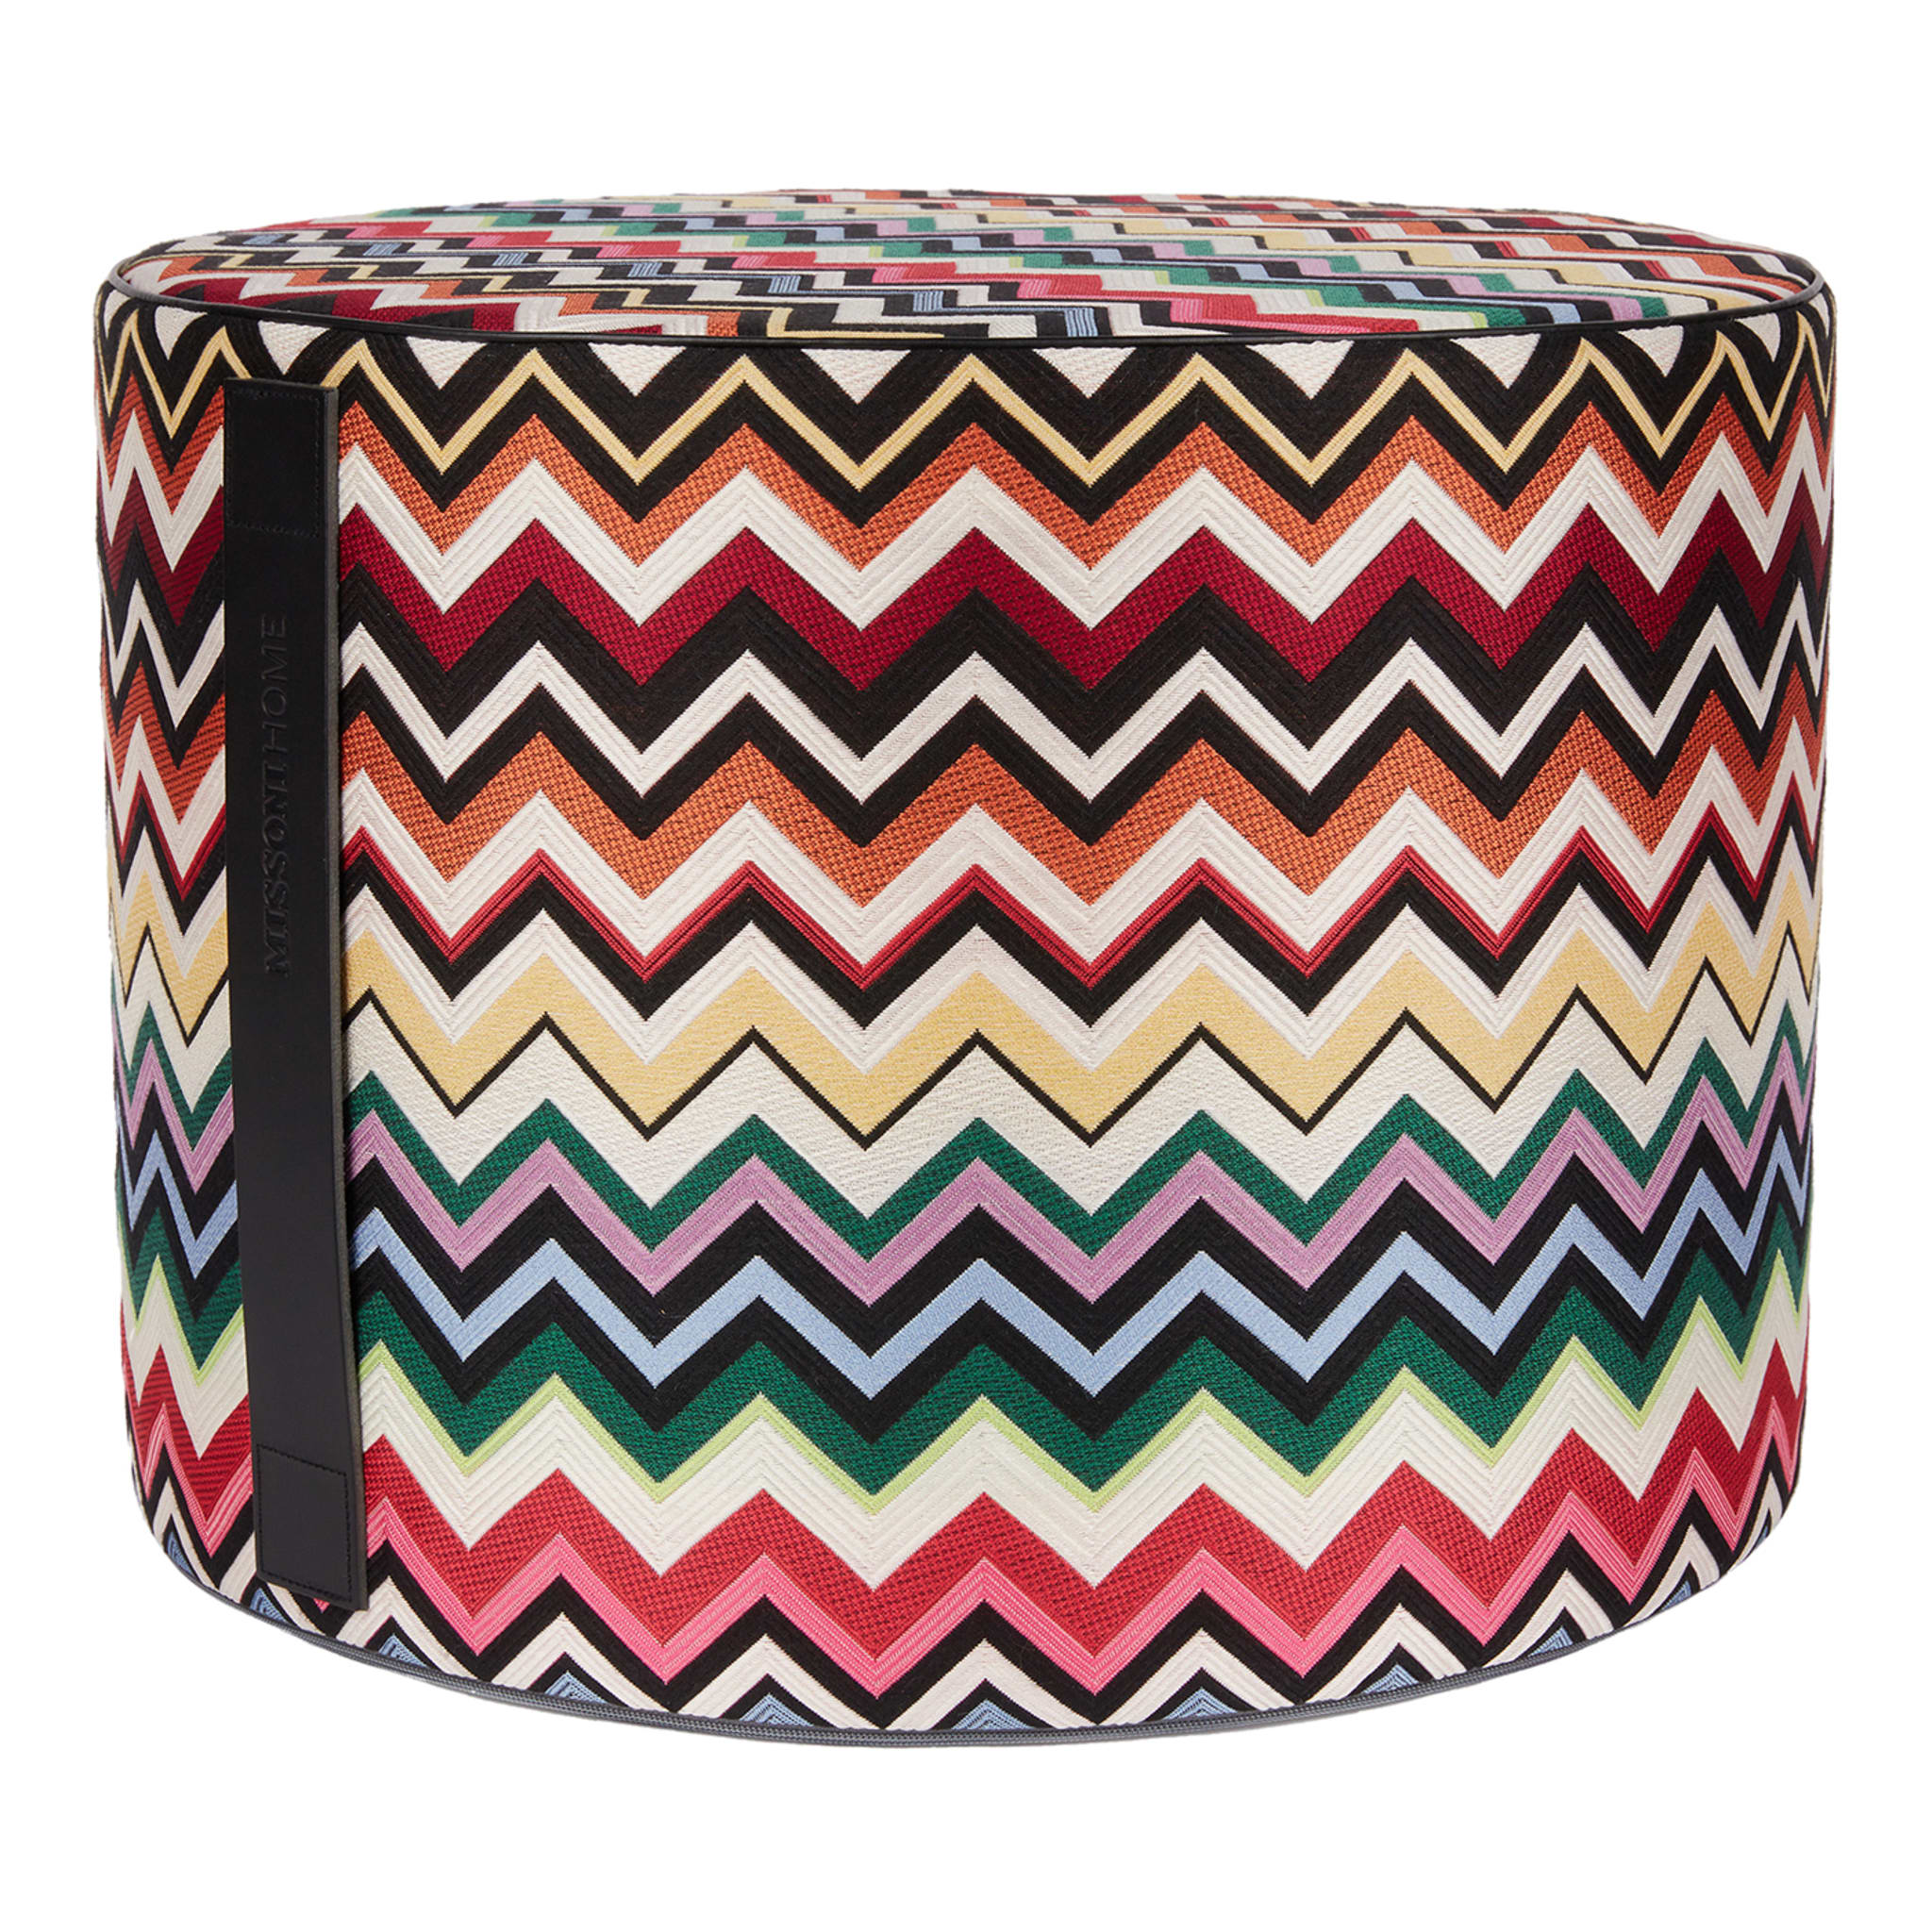 Belfast Cylindrical Pouf #2 - Main view